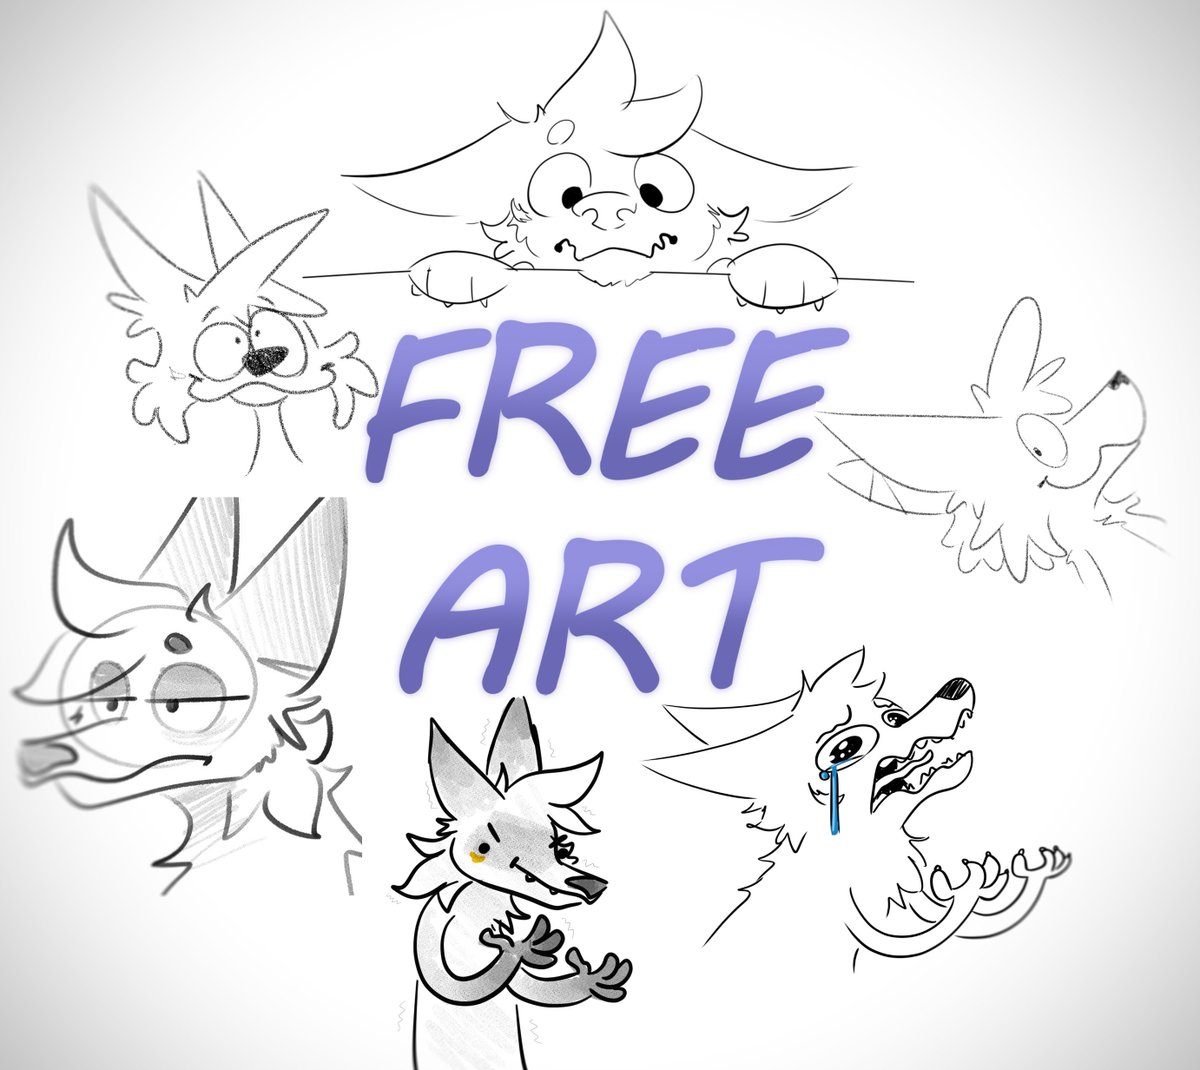 ✨FREE ART✨ How to enter : -Follow -RT -Comment your ref (SFW)